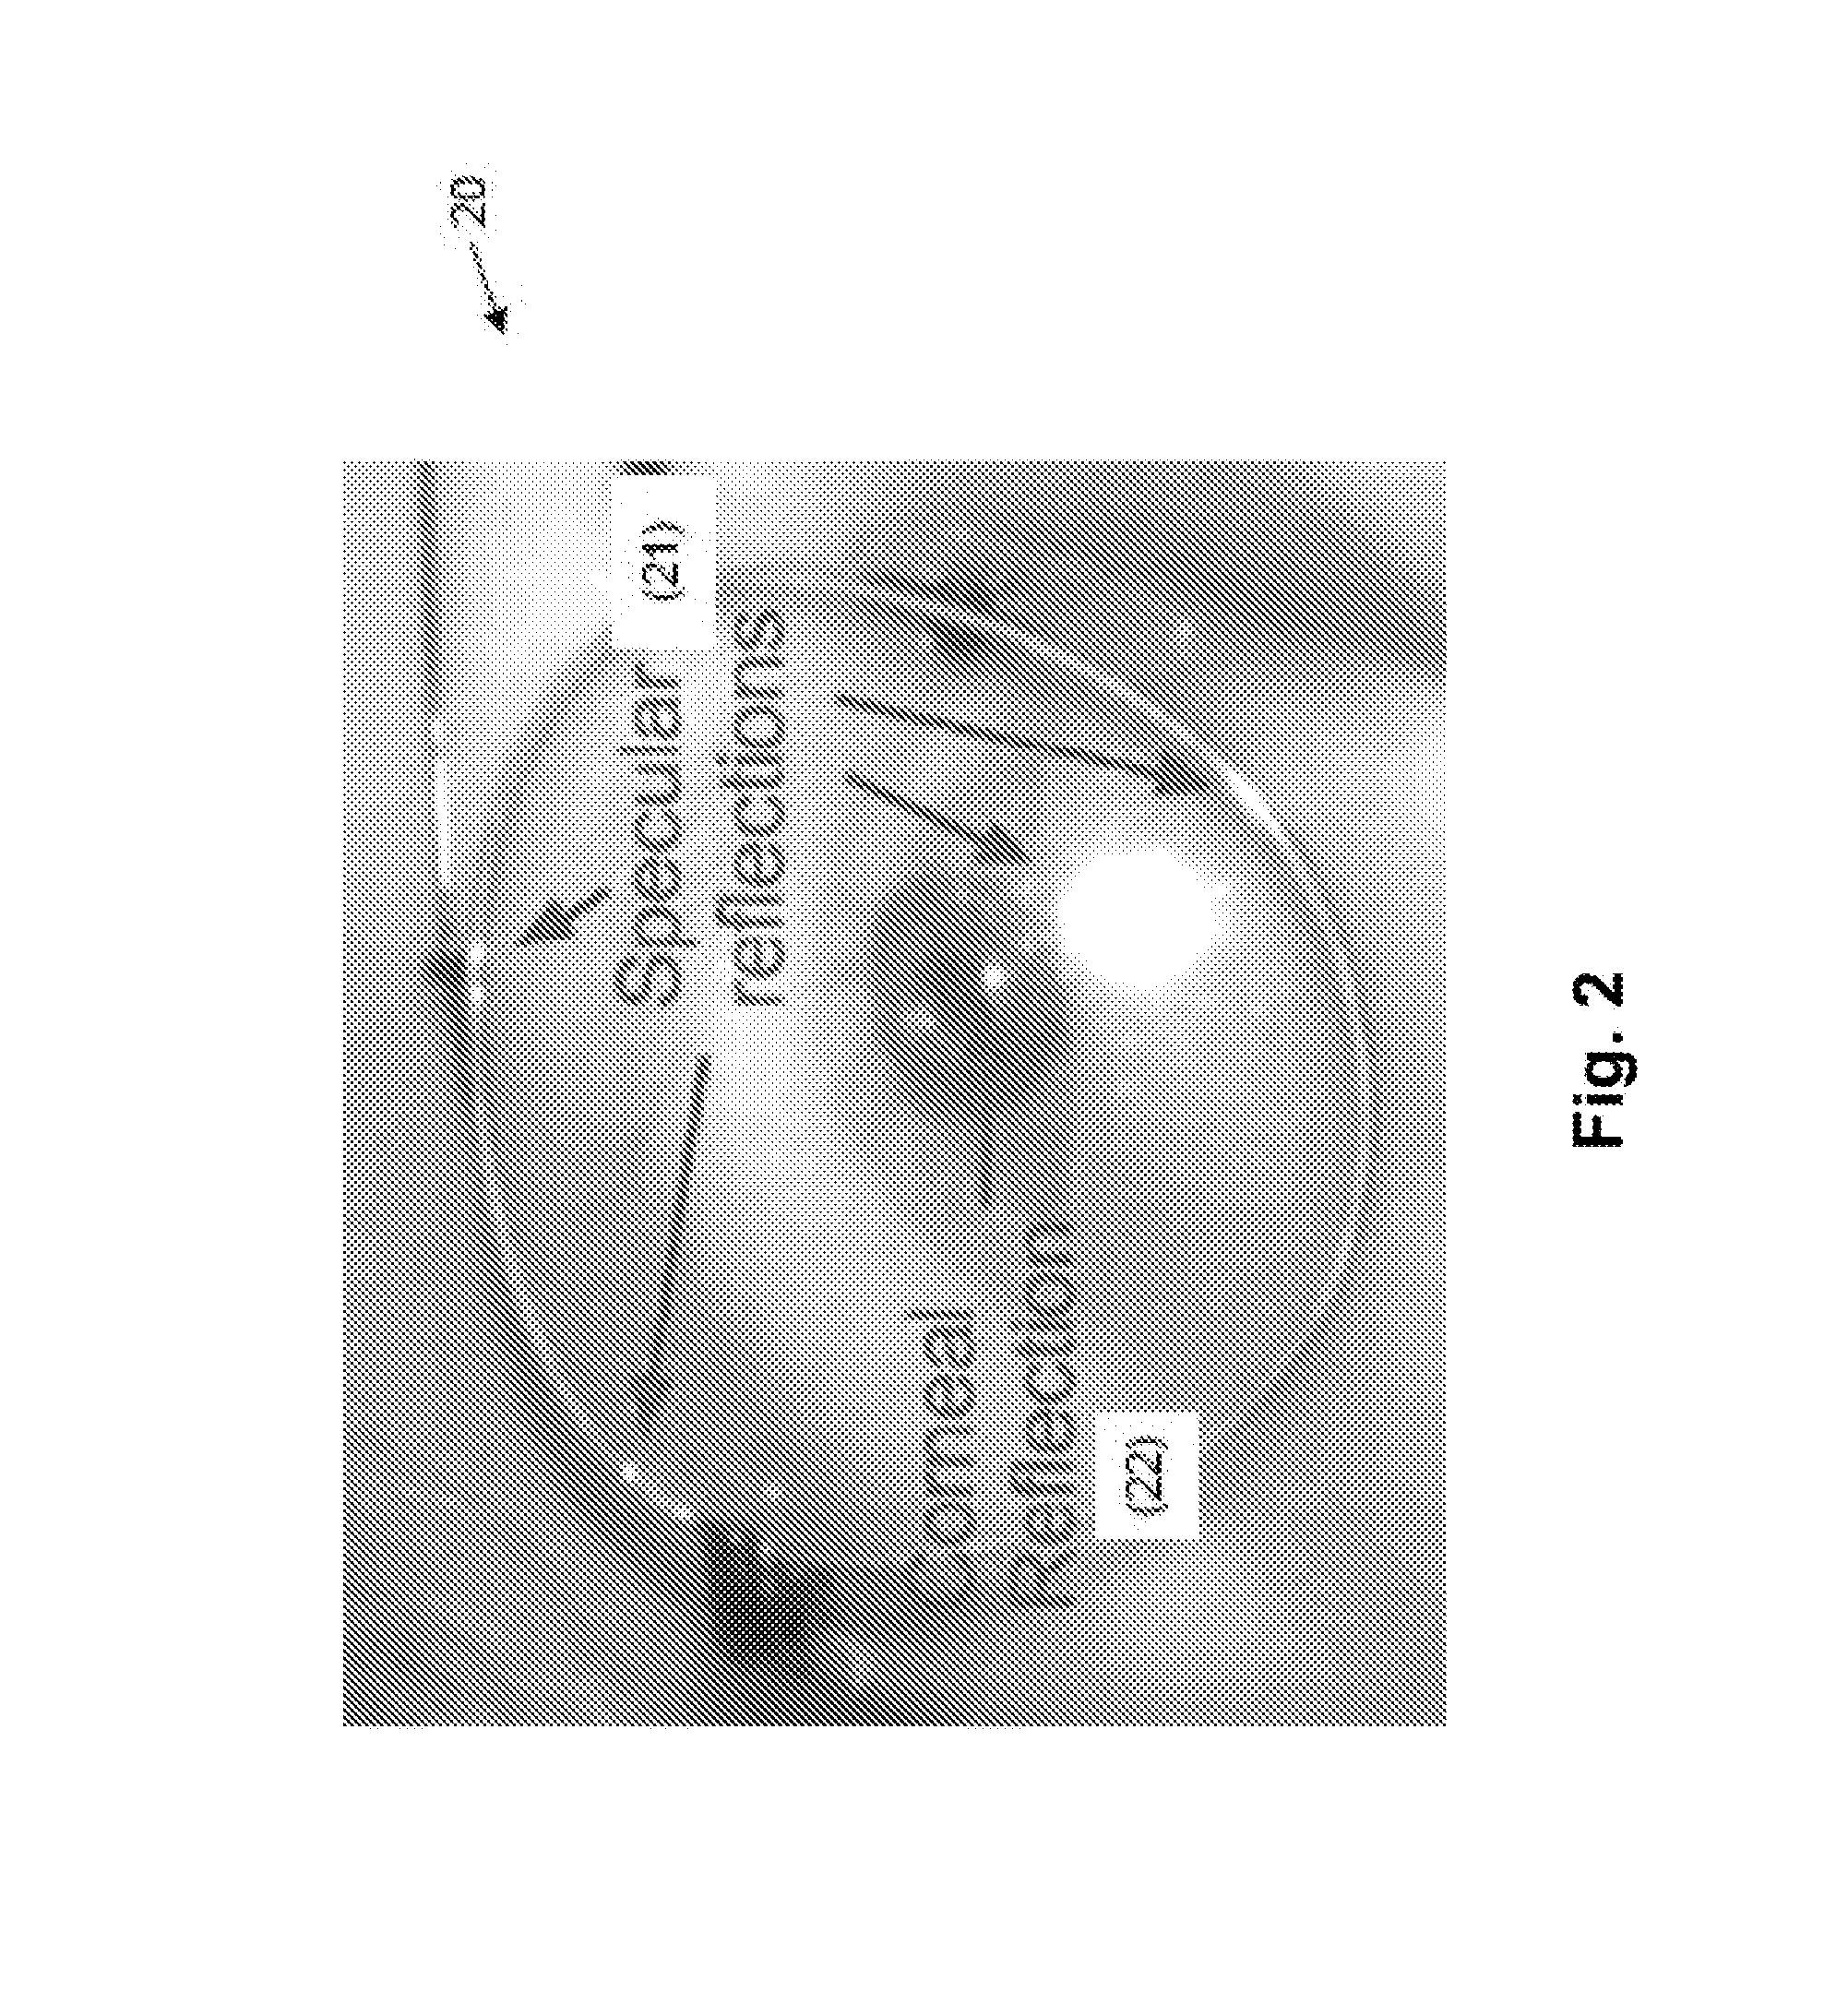 Method and apparatus for eye detection from glints